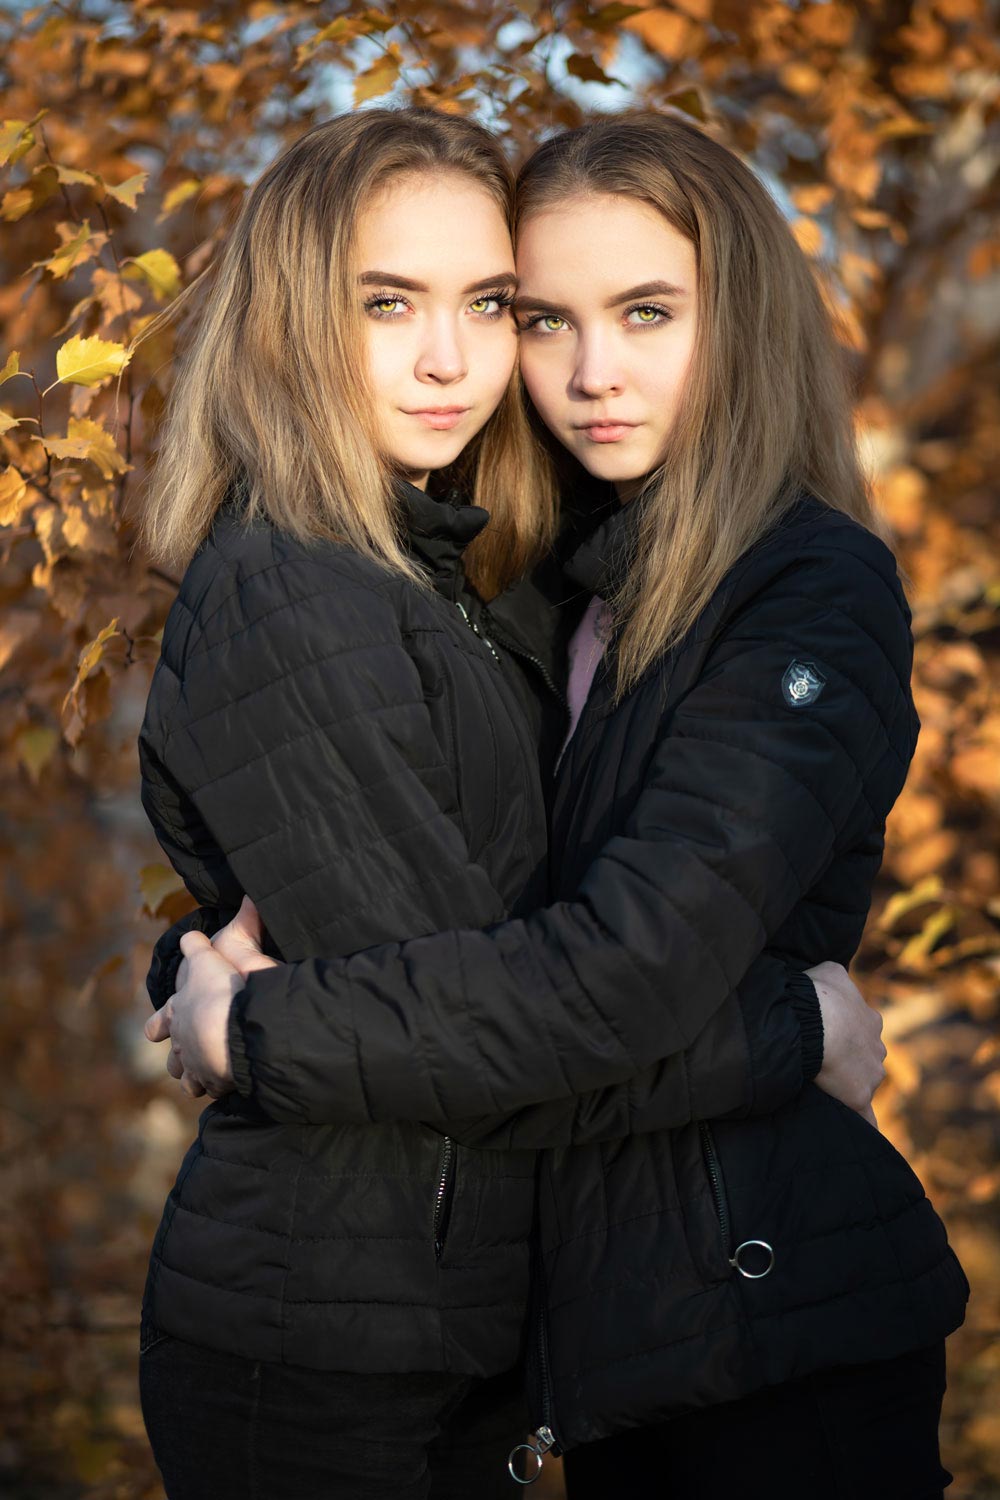 Lovely twins